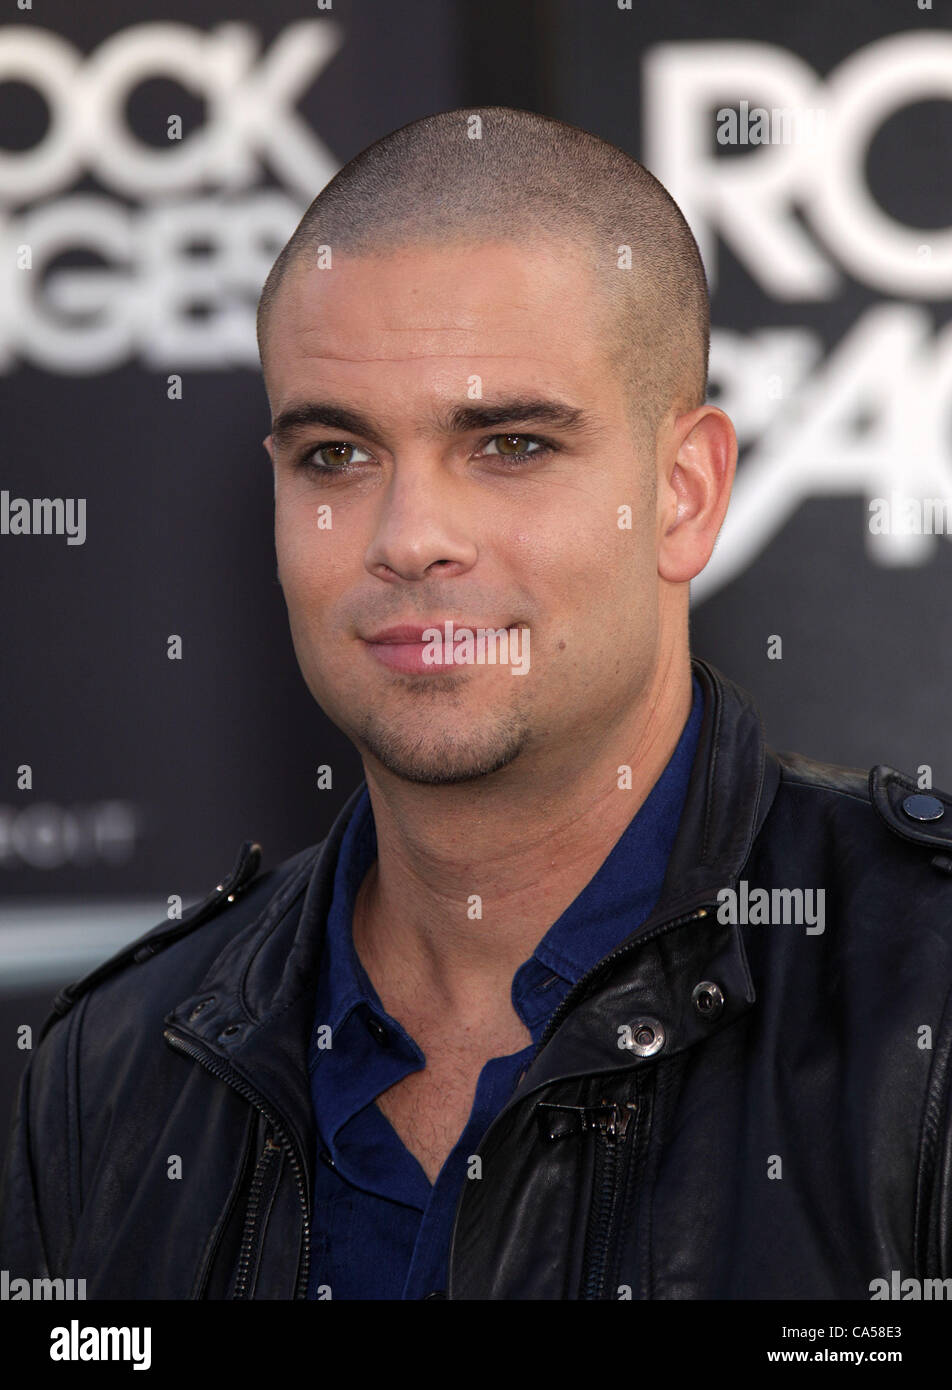 June 8, 2012 - Hollywood, California, U.S. - MARK SALLING arrives for the premiere of the film 'Rock Of Ages' at the Chinese theater. (Credit Image: © Lisa O'Connor/ZUMAPRESS.com) Stock Photo